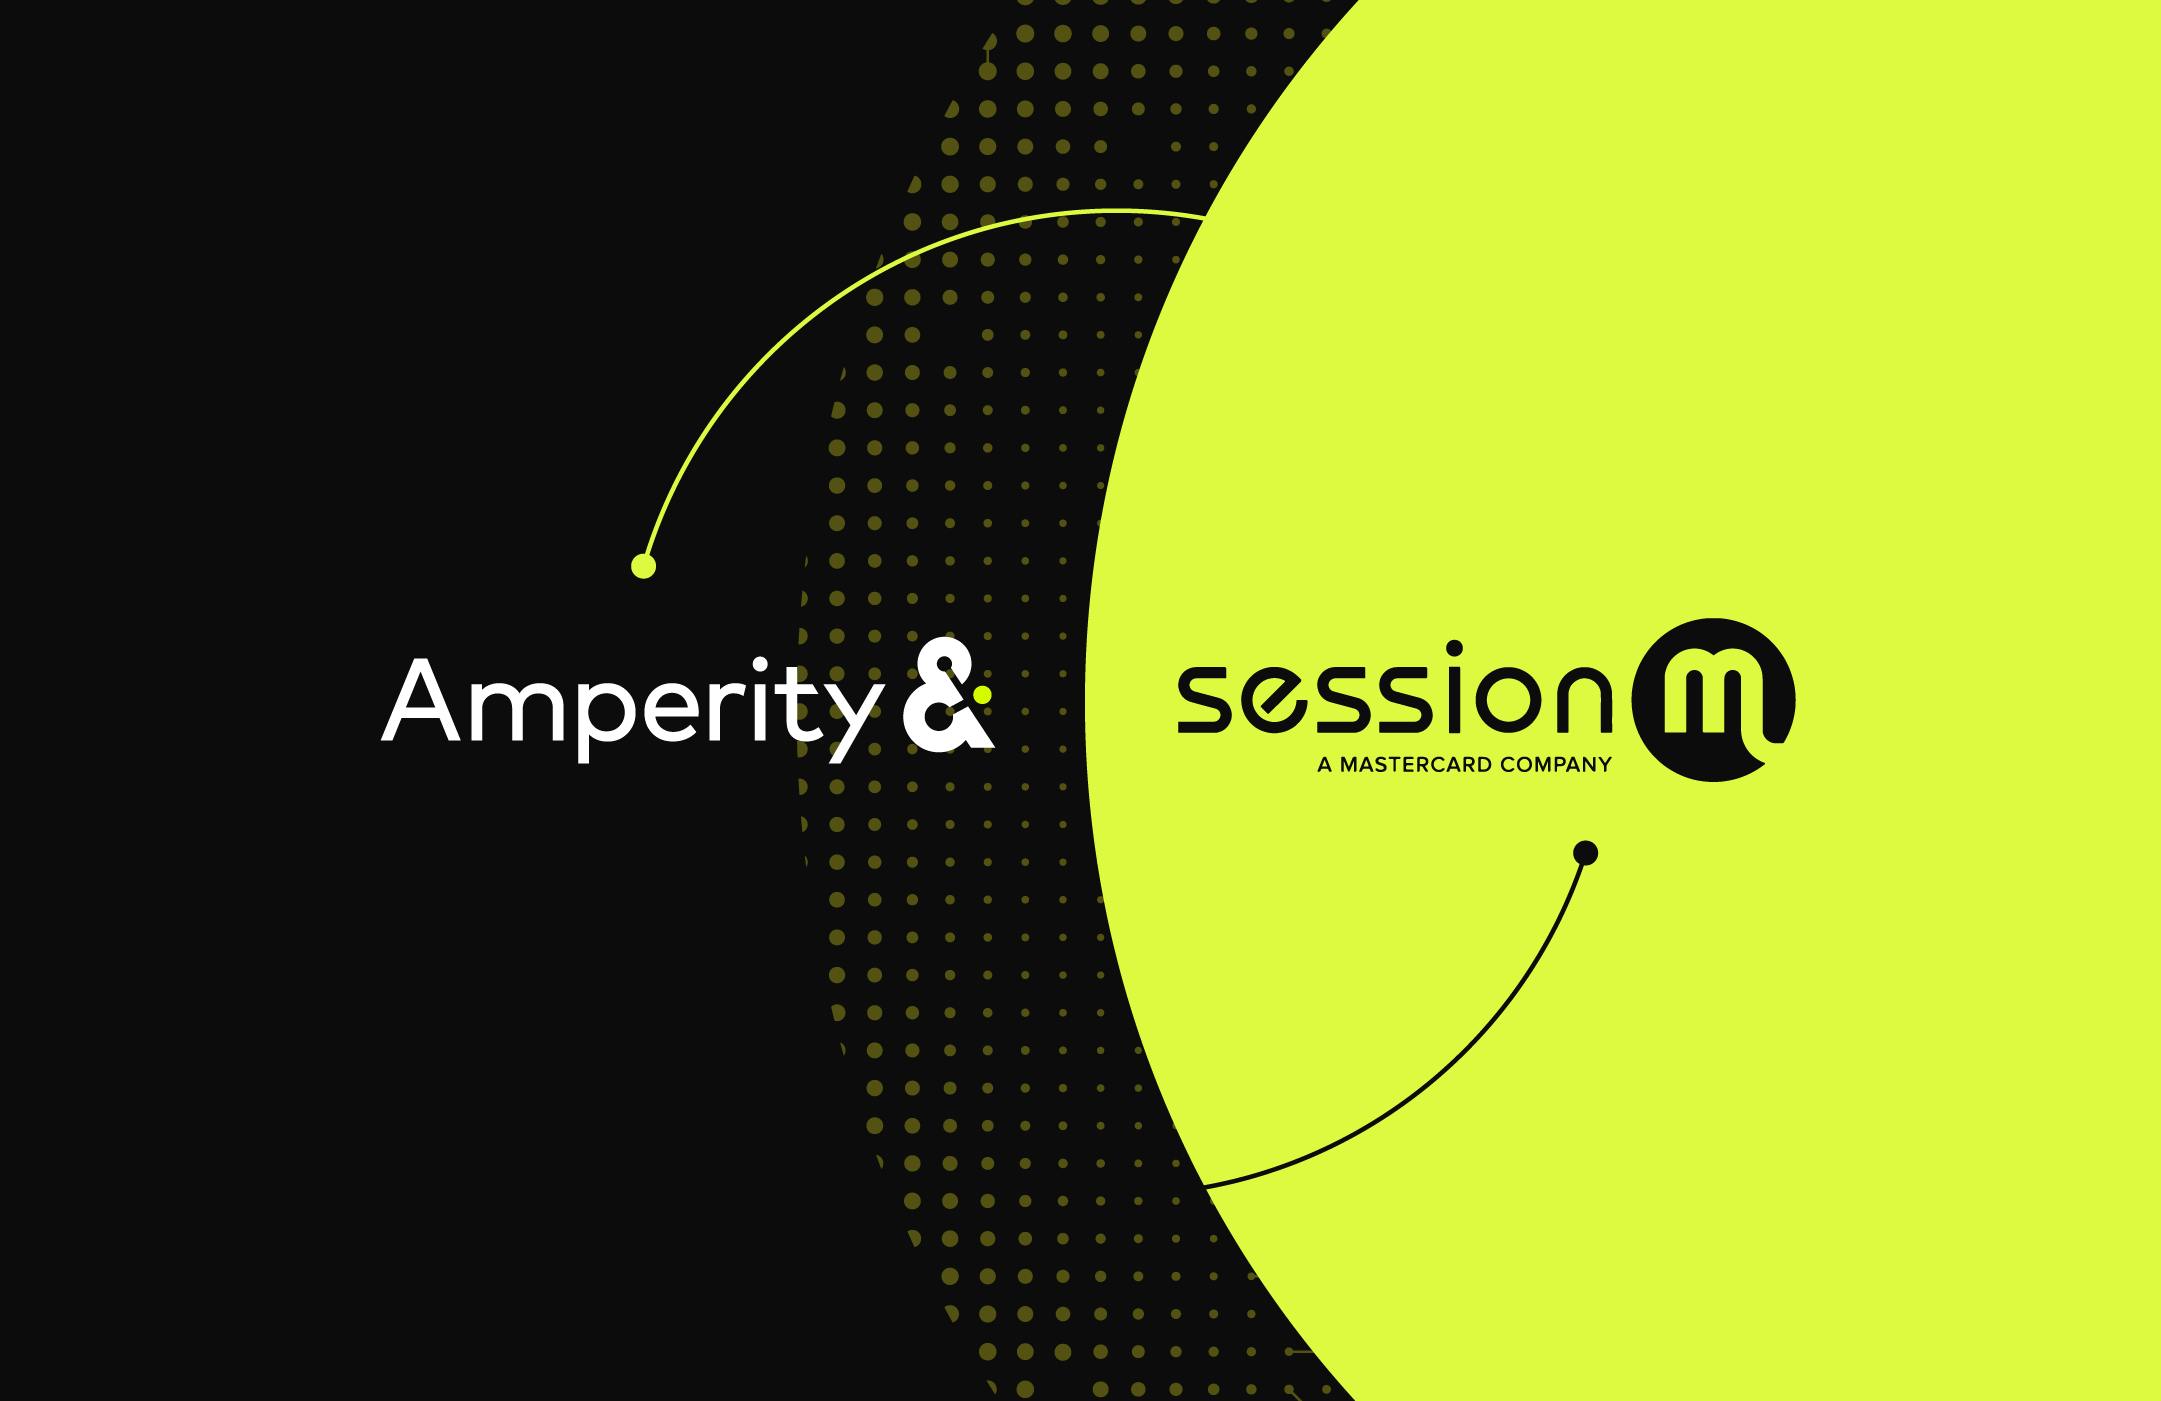 Amperity & SessionM